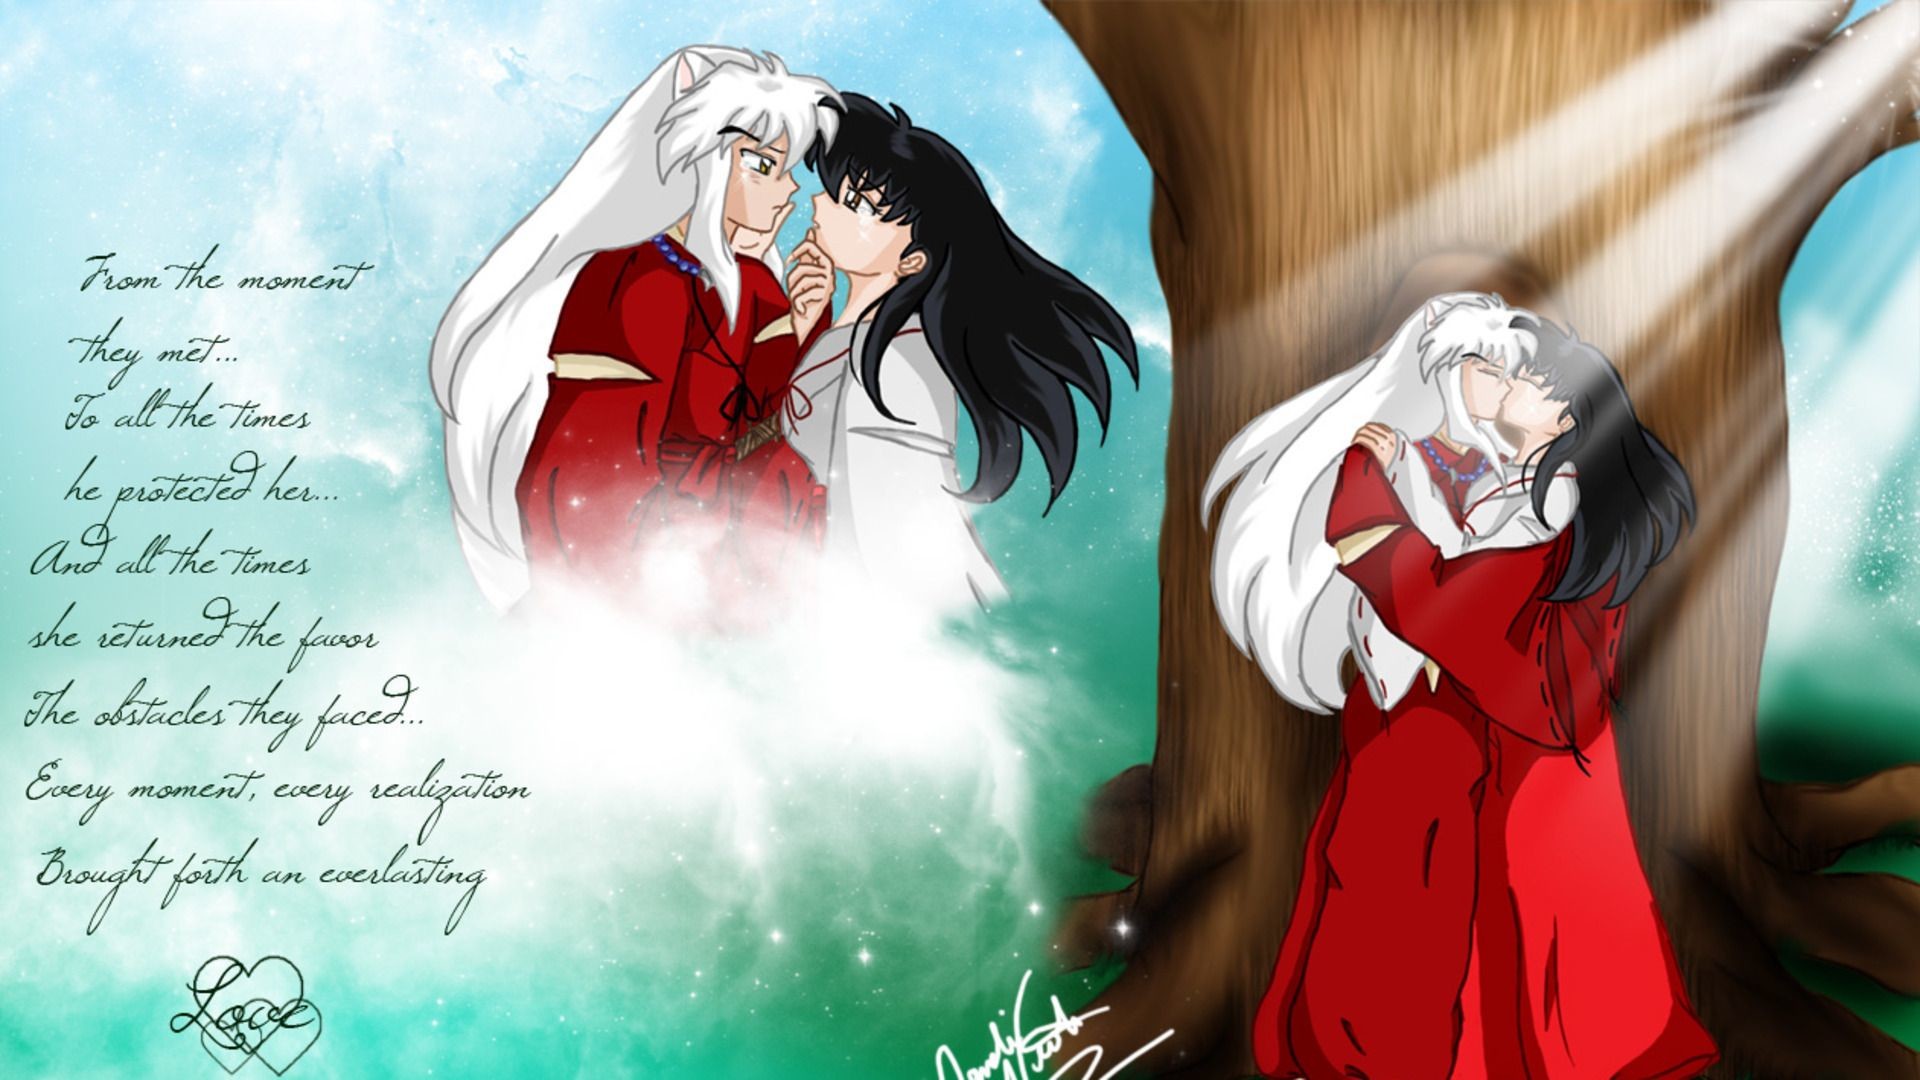 1920x1080 Inuyasha Wallpapers High Quality | Download Free